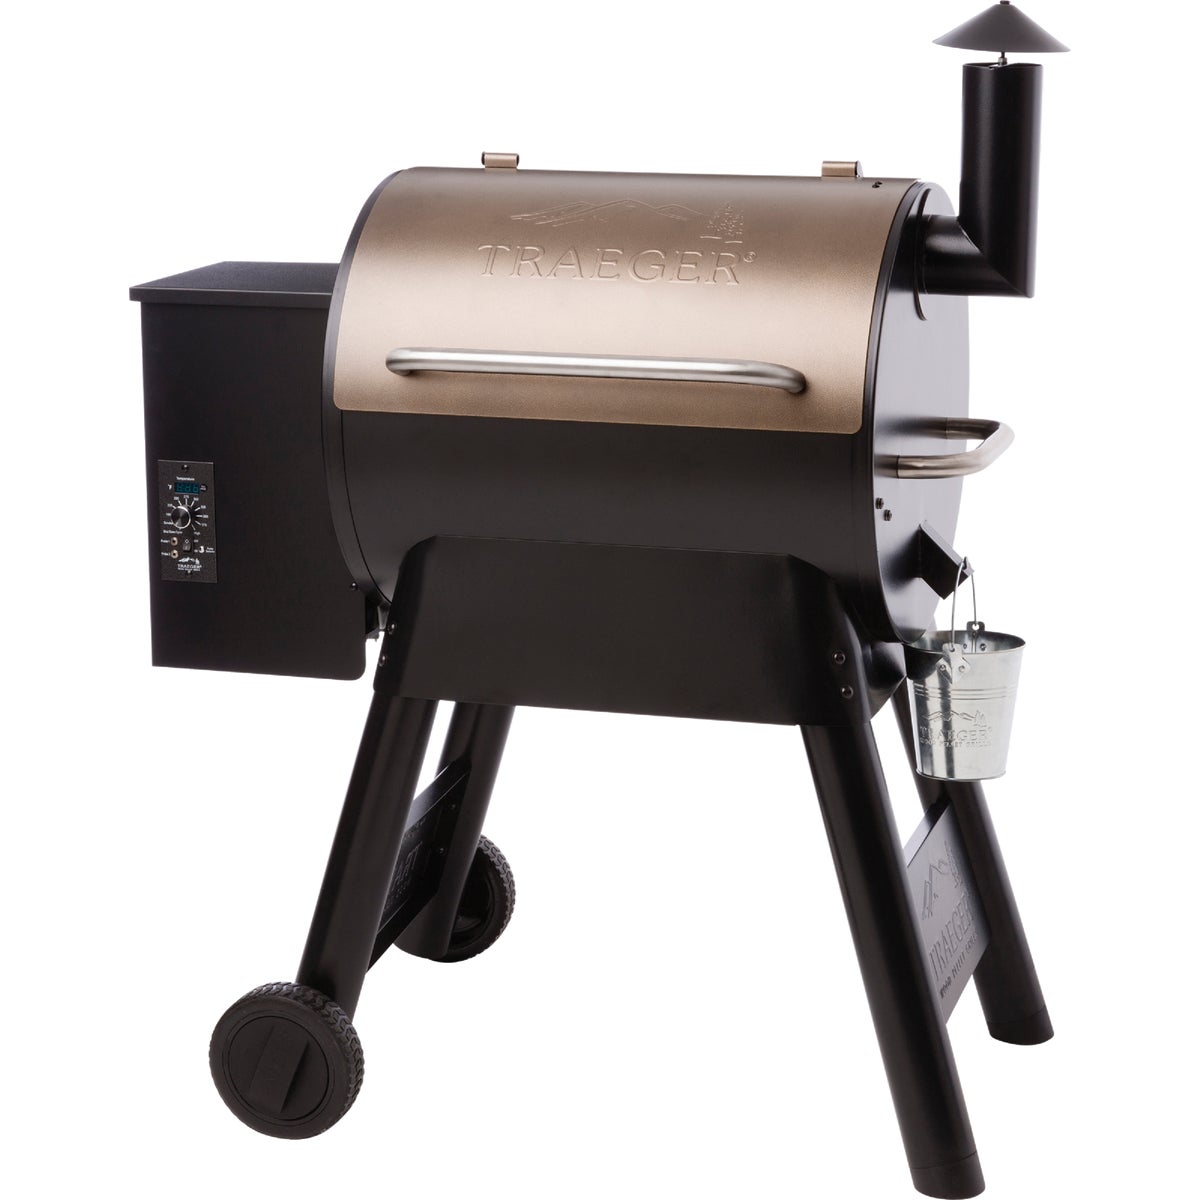 Item 808200, Grill, smoke, bake, braise, roast, or barbecue. Features 572 Sq. In.